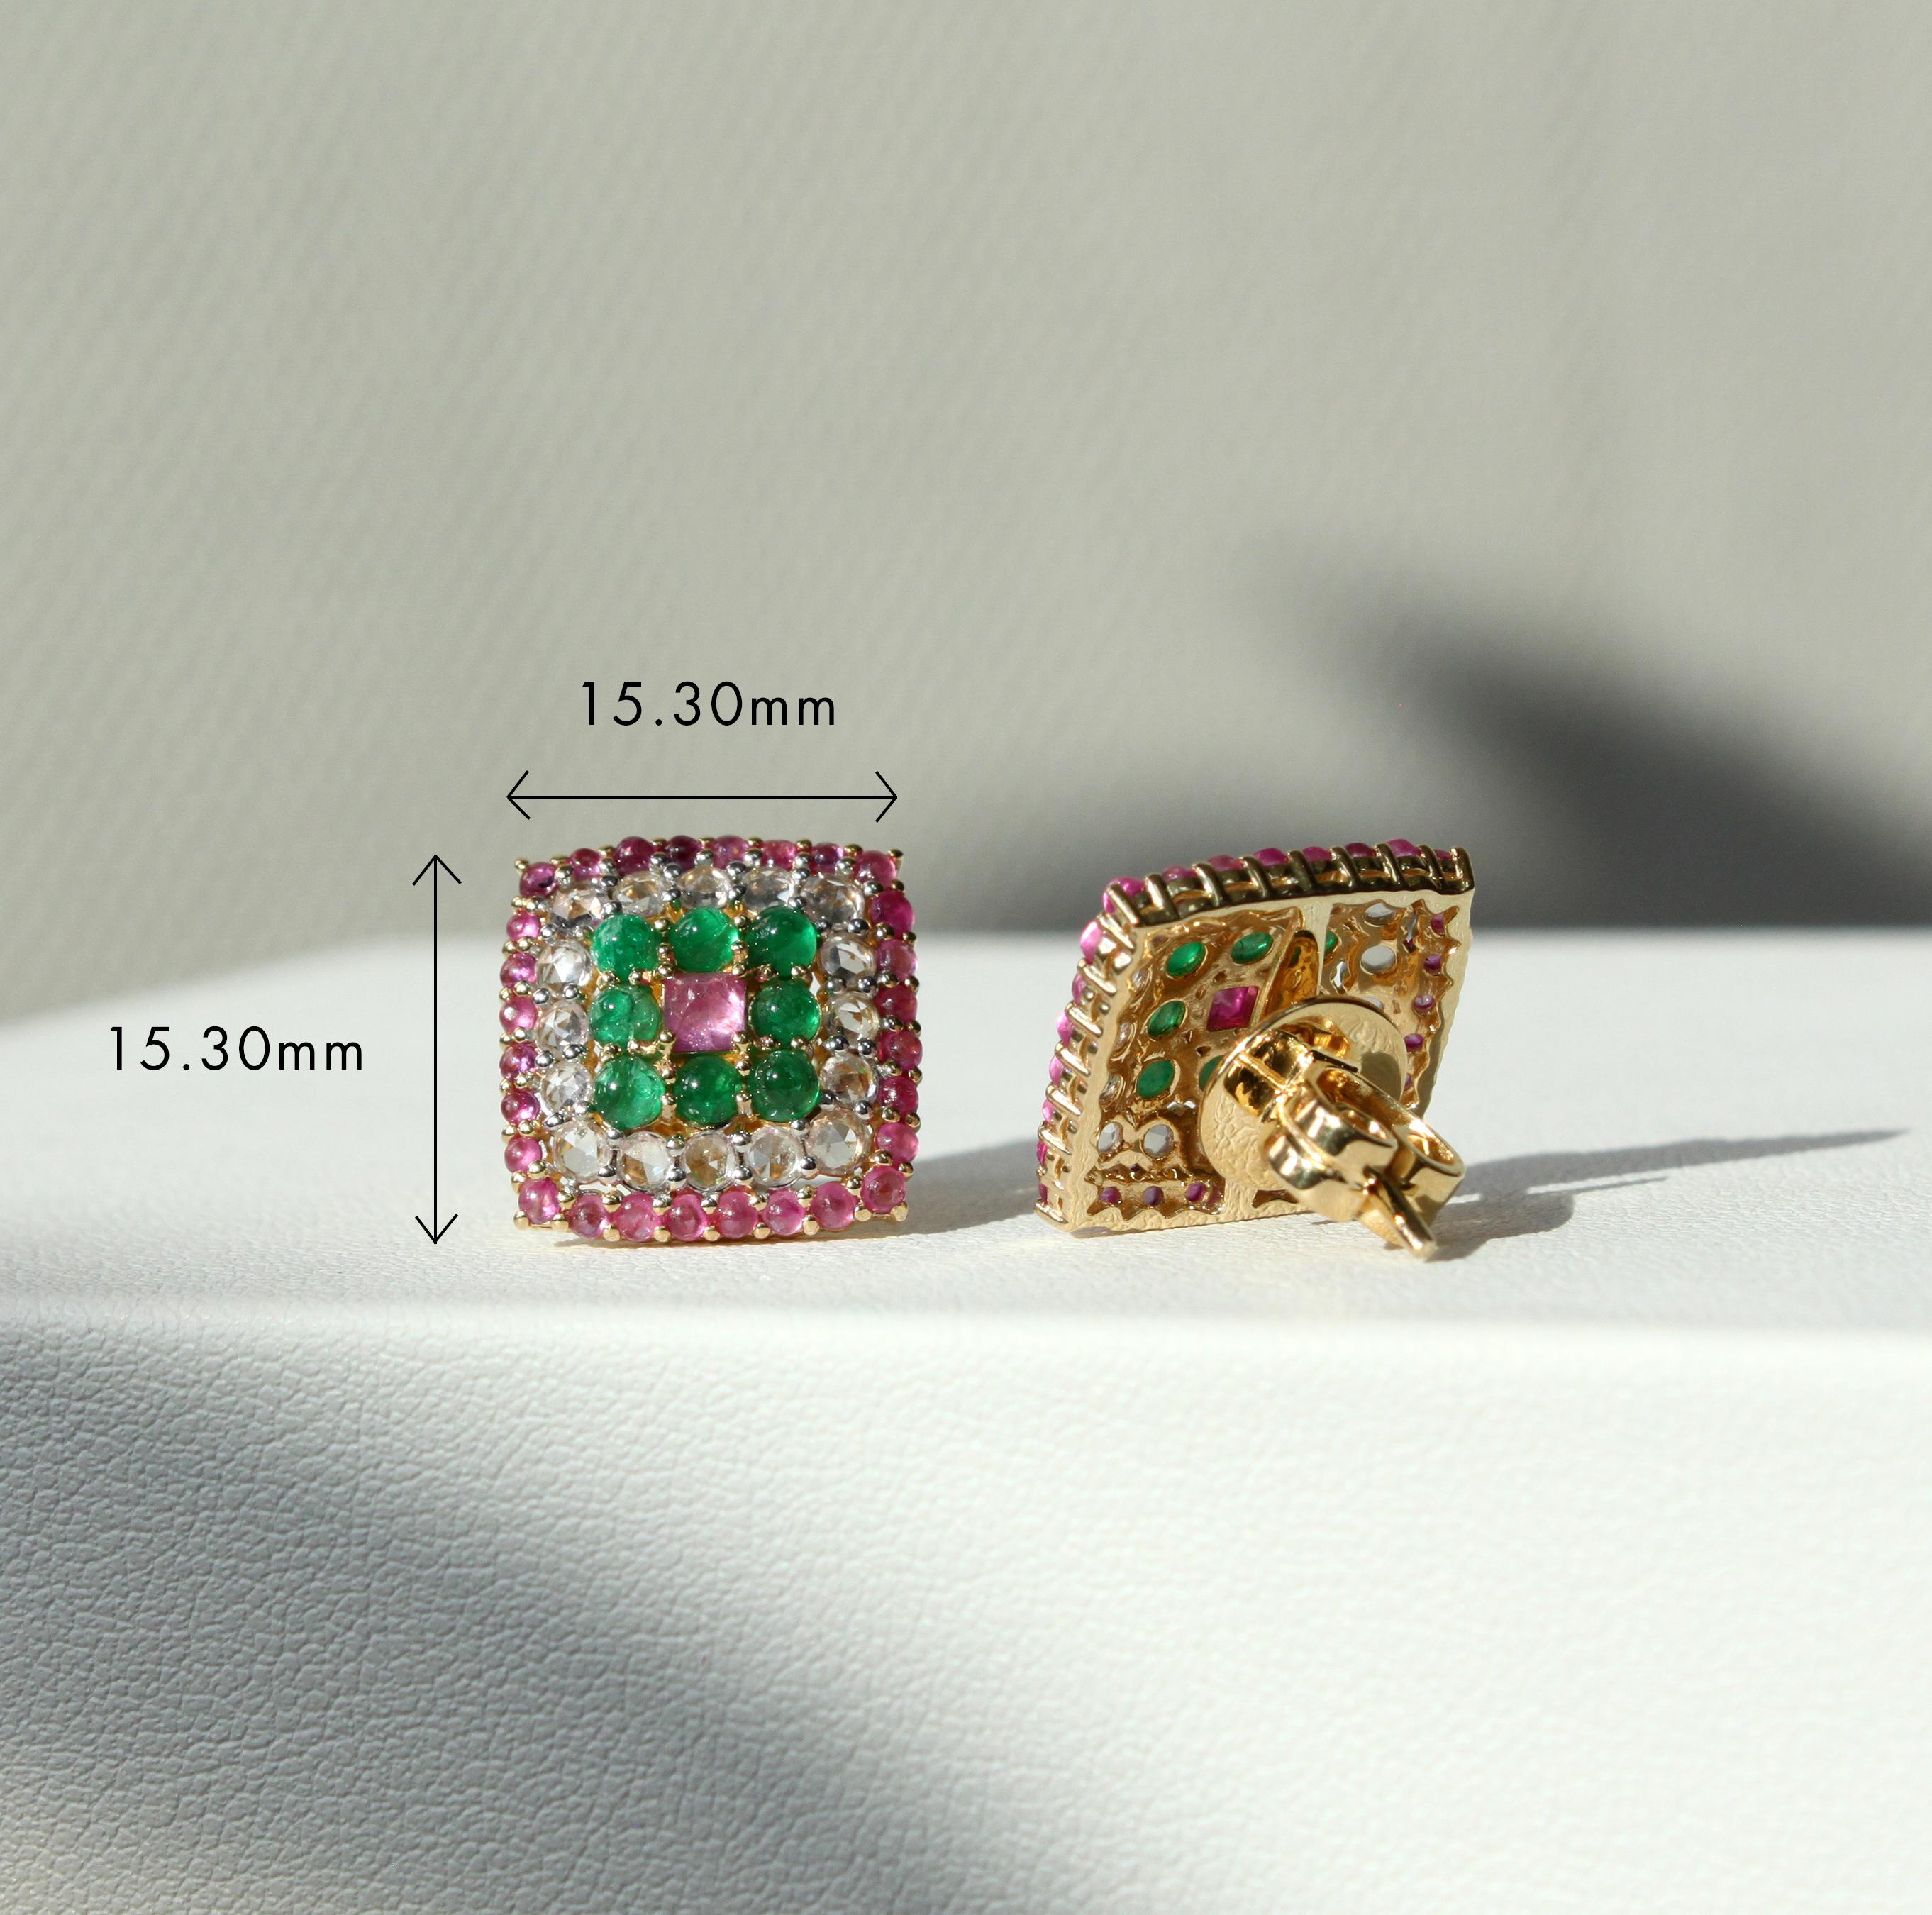 14K white gold
1.22ct emerald 
1.82ct ruby
1.46ct white sapphires 
Total earring weight7.61 g

These captivating earrings offer a stunning display of color, set in luxurious 14K white gold. In the center is a mesmerizing pink sapphire cabochon, its